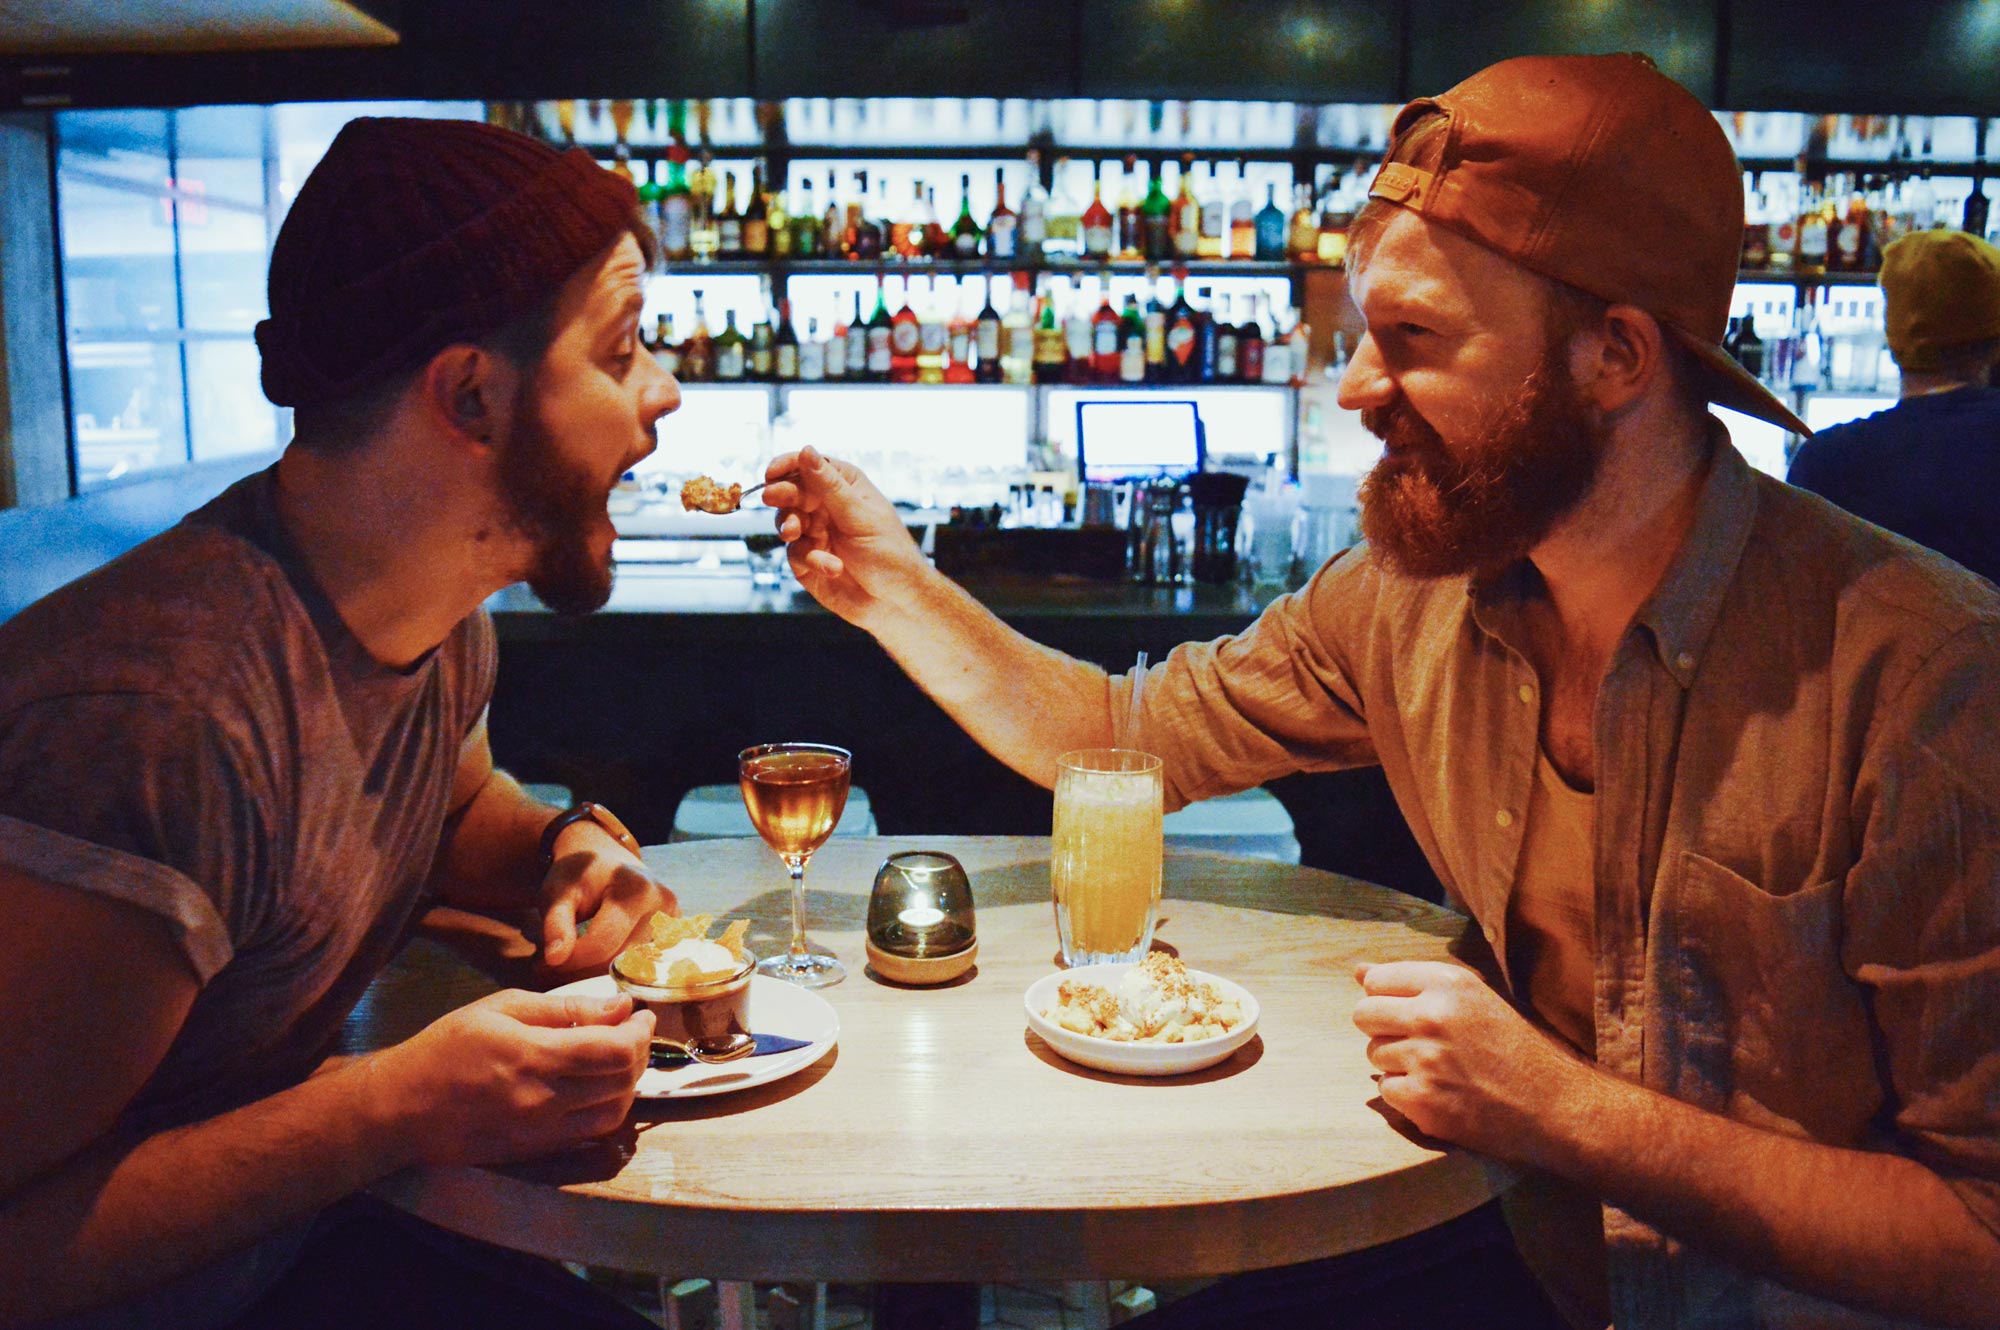 Vancouver: 8 of the Best Gay-friendly Restaurants